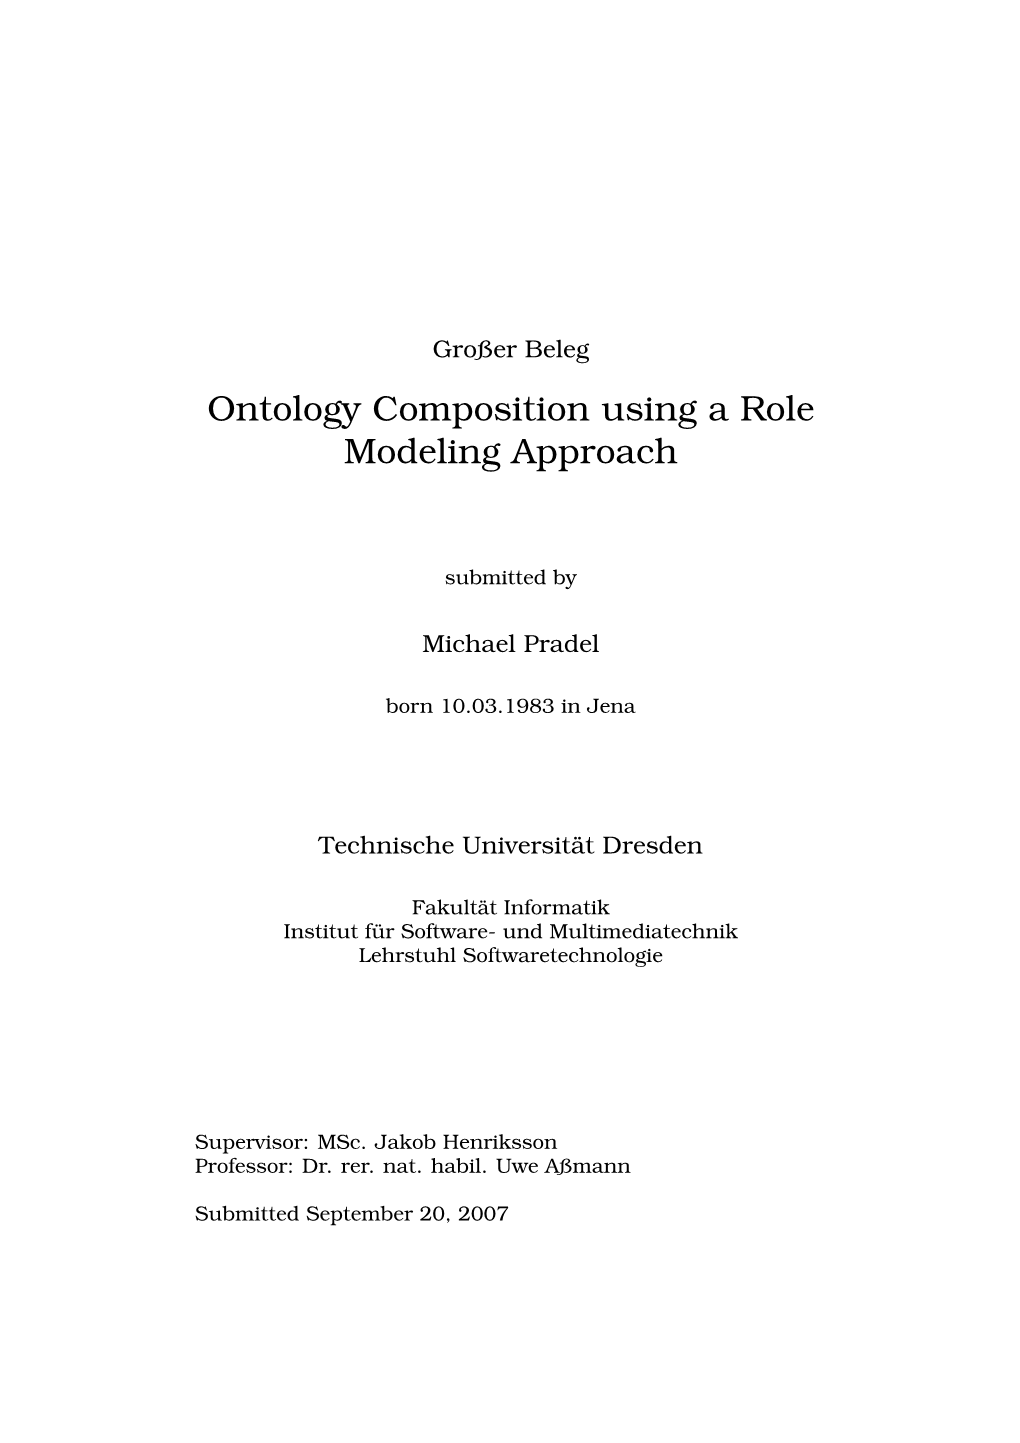 Ontology Composition Using a Role Modeling Approach